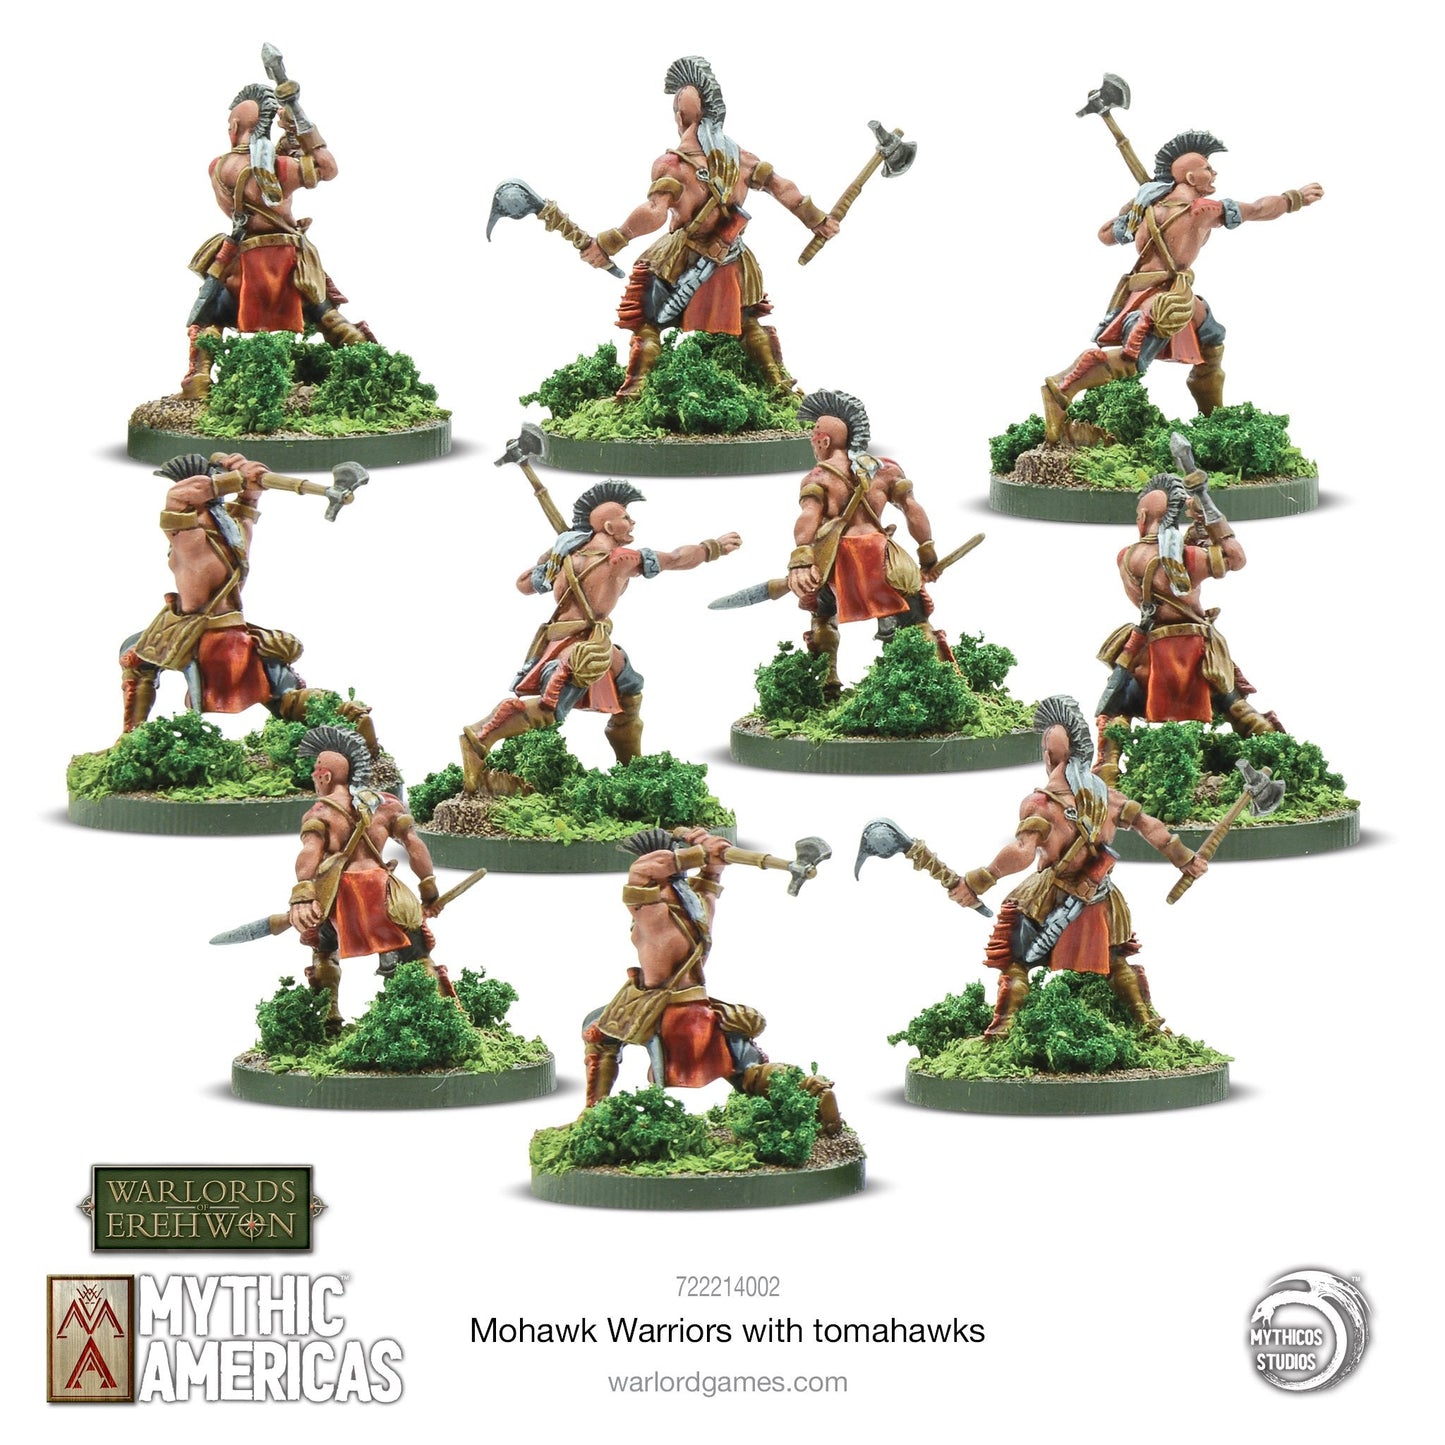 Mythic Americas - Tribal Nations: Mohawk Warriors with Tomahawks